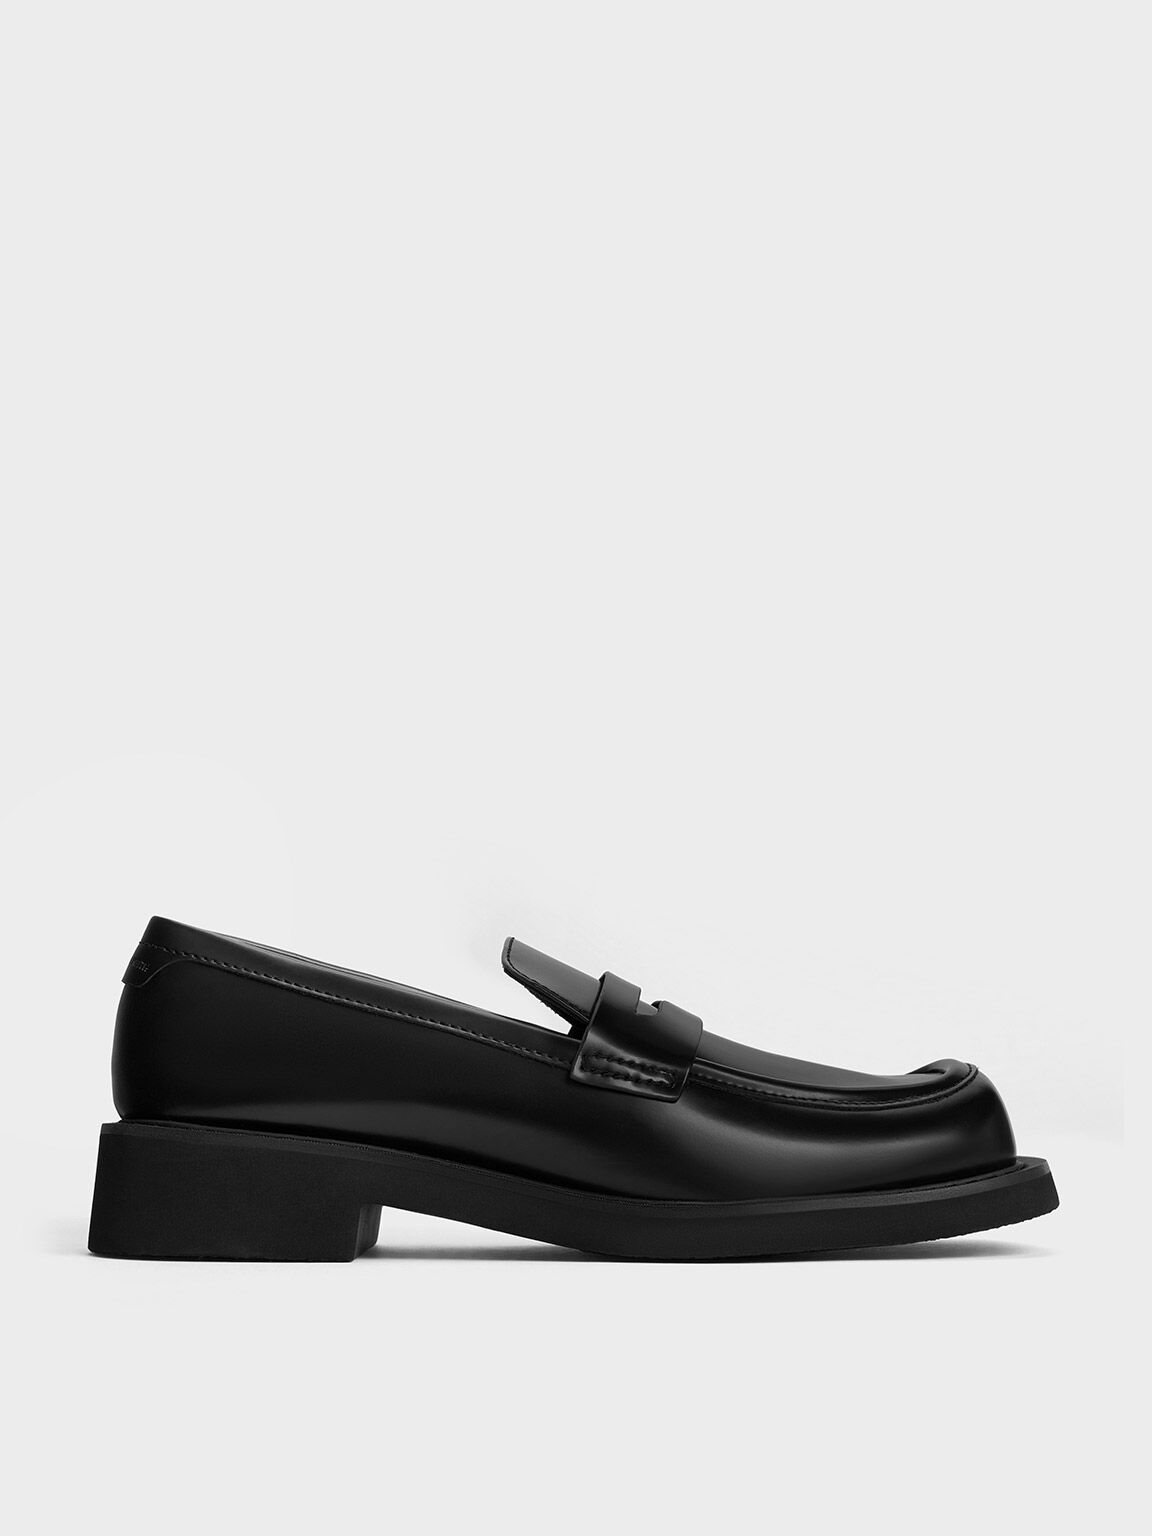 Women's Flat Loafers | Shop Exclusive Styles | CHARLES & KEITH 